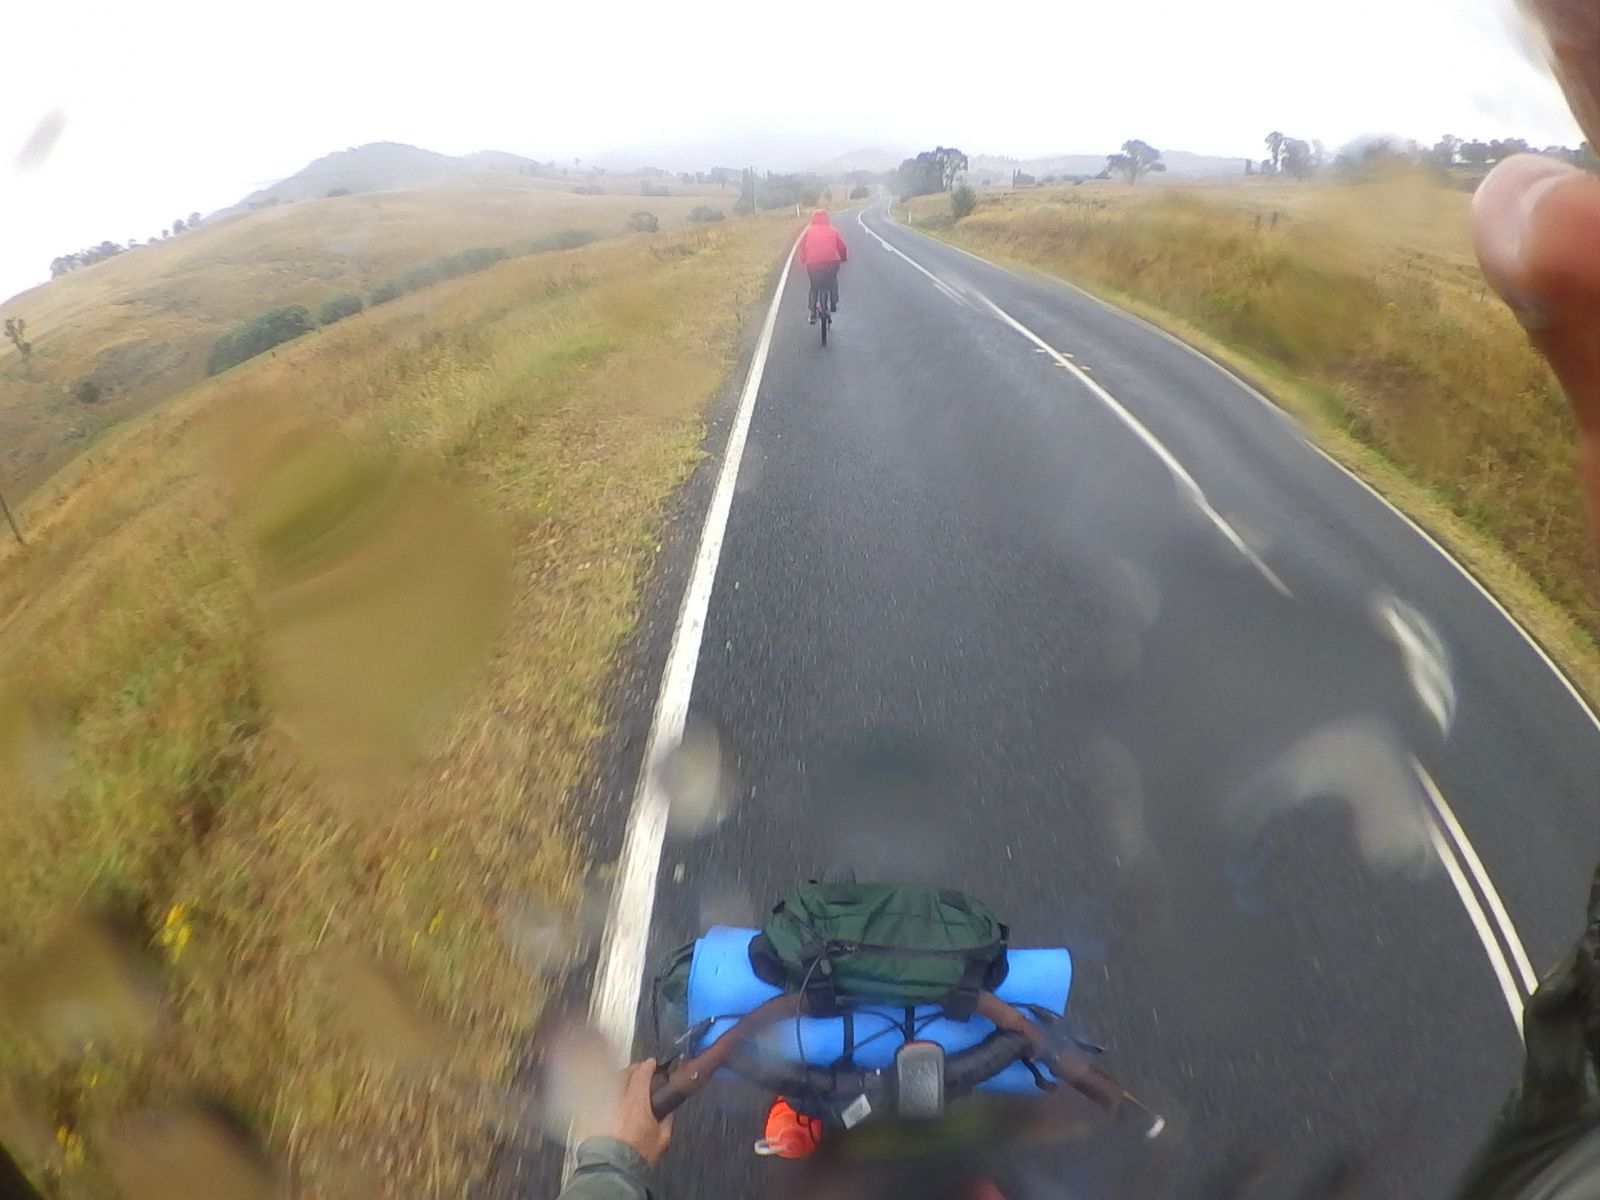 A wet ride on Boxing day